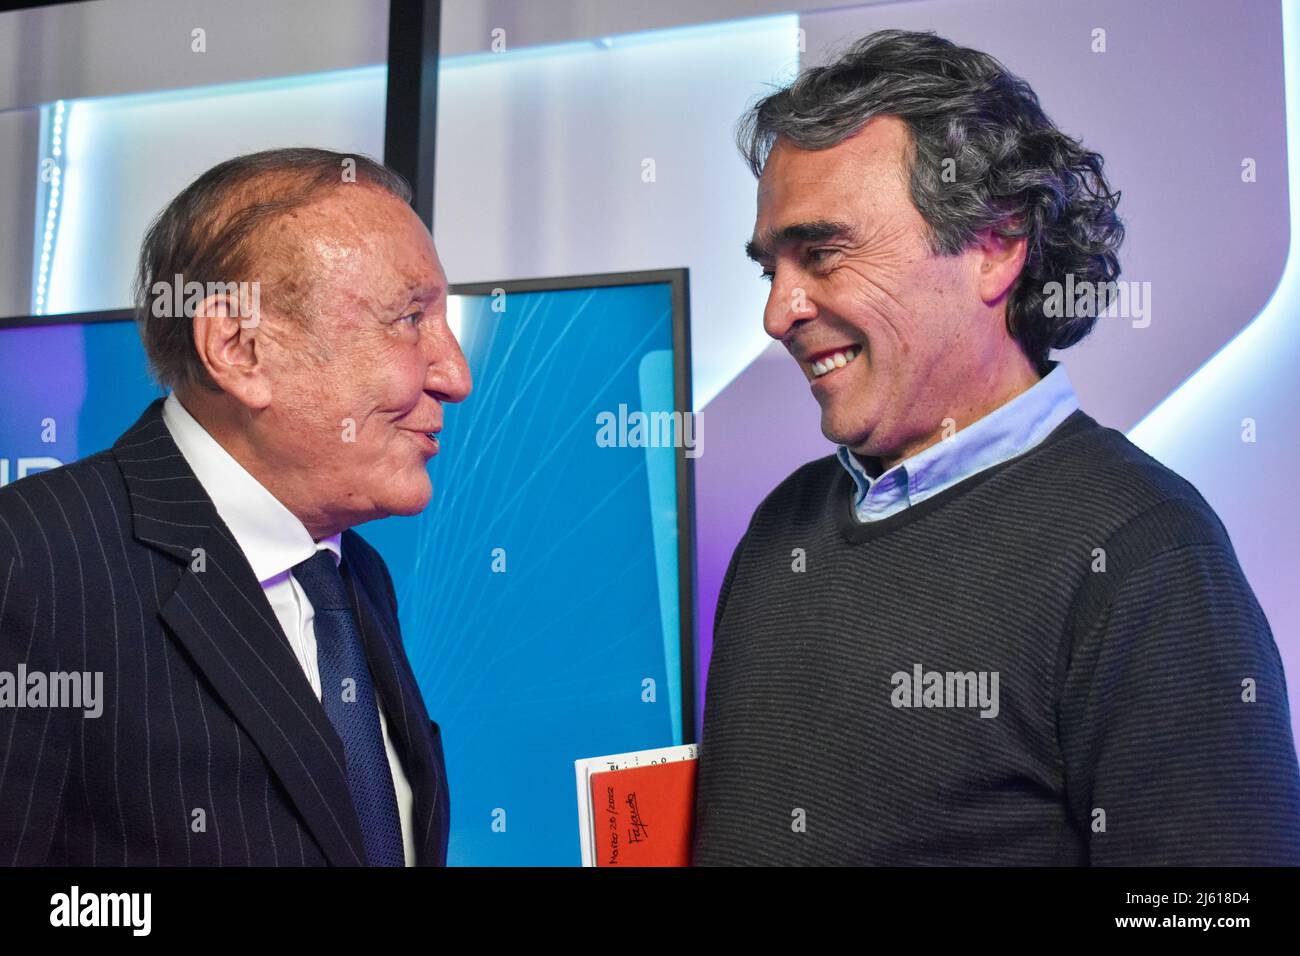 Presidential candidate Rodolfo Hernandez (Left) speaks with candidate Sergio Fajardo (Right) after the Prisa Media 'Hora 20' Radio debate in Bogota, Colombia on April 26, 2022. Photo by: Cristian Bayona/Long Visual Press Stock Photo